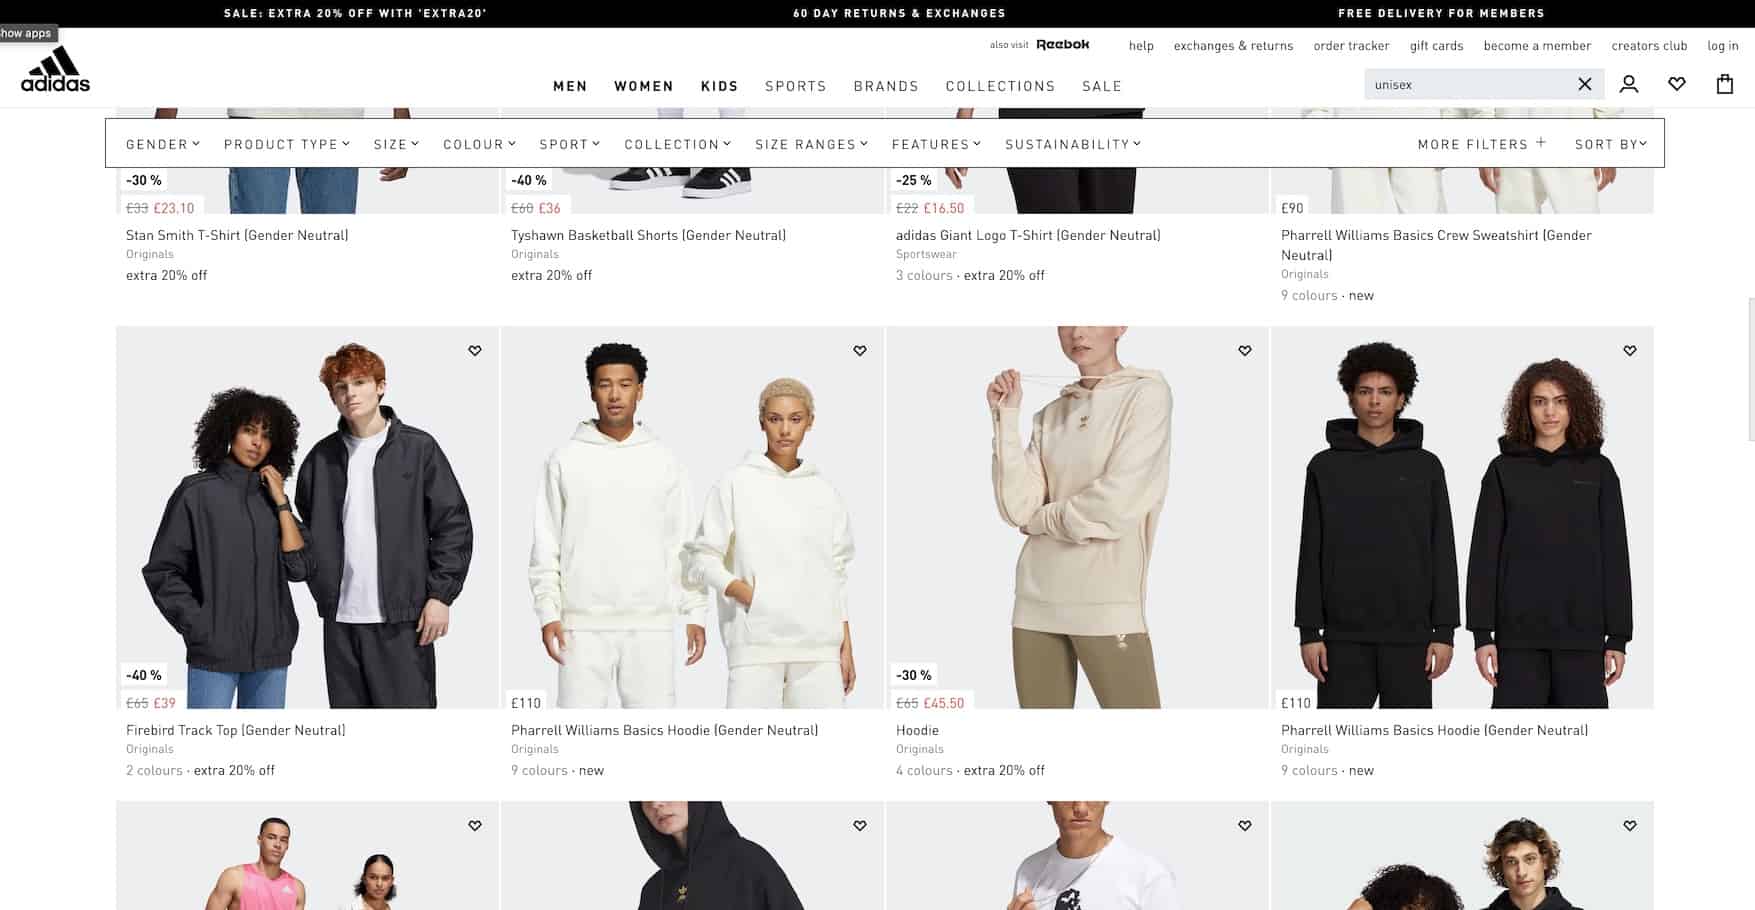 Screenshot of Adidas website showing diverse use of models in product shots